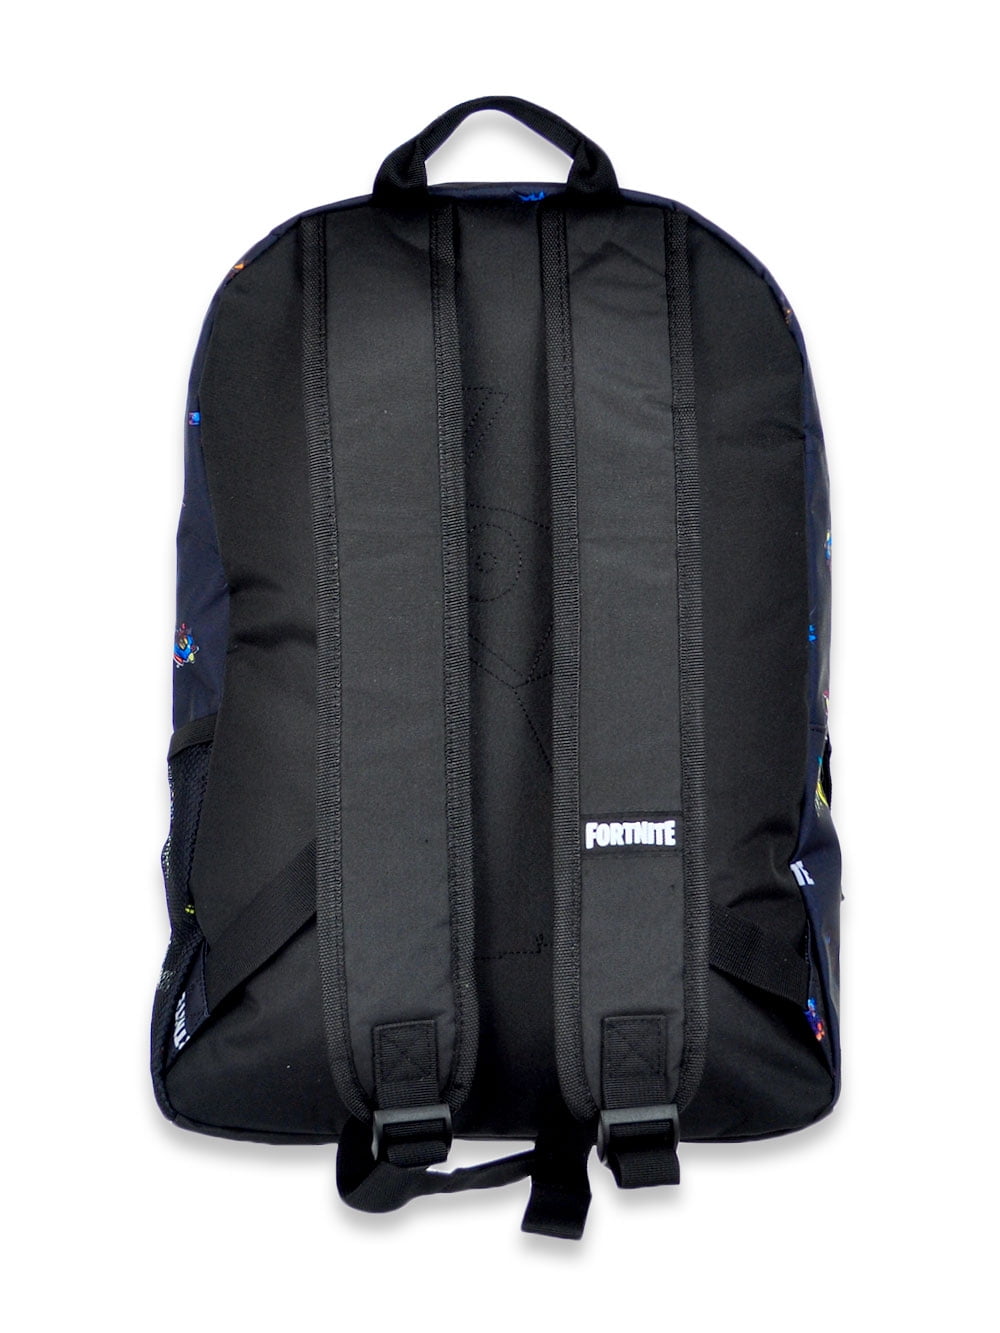 Backpack of Tokens - 1150 - Epic Games Store